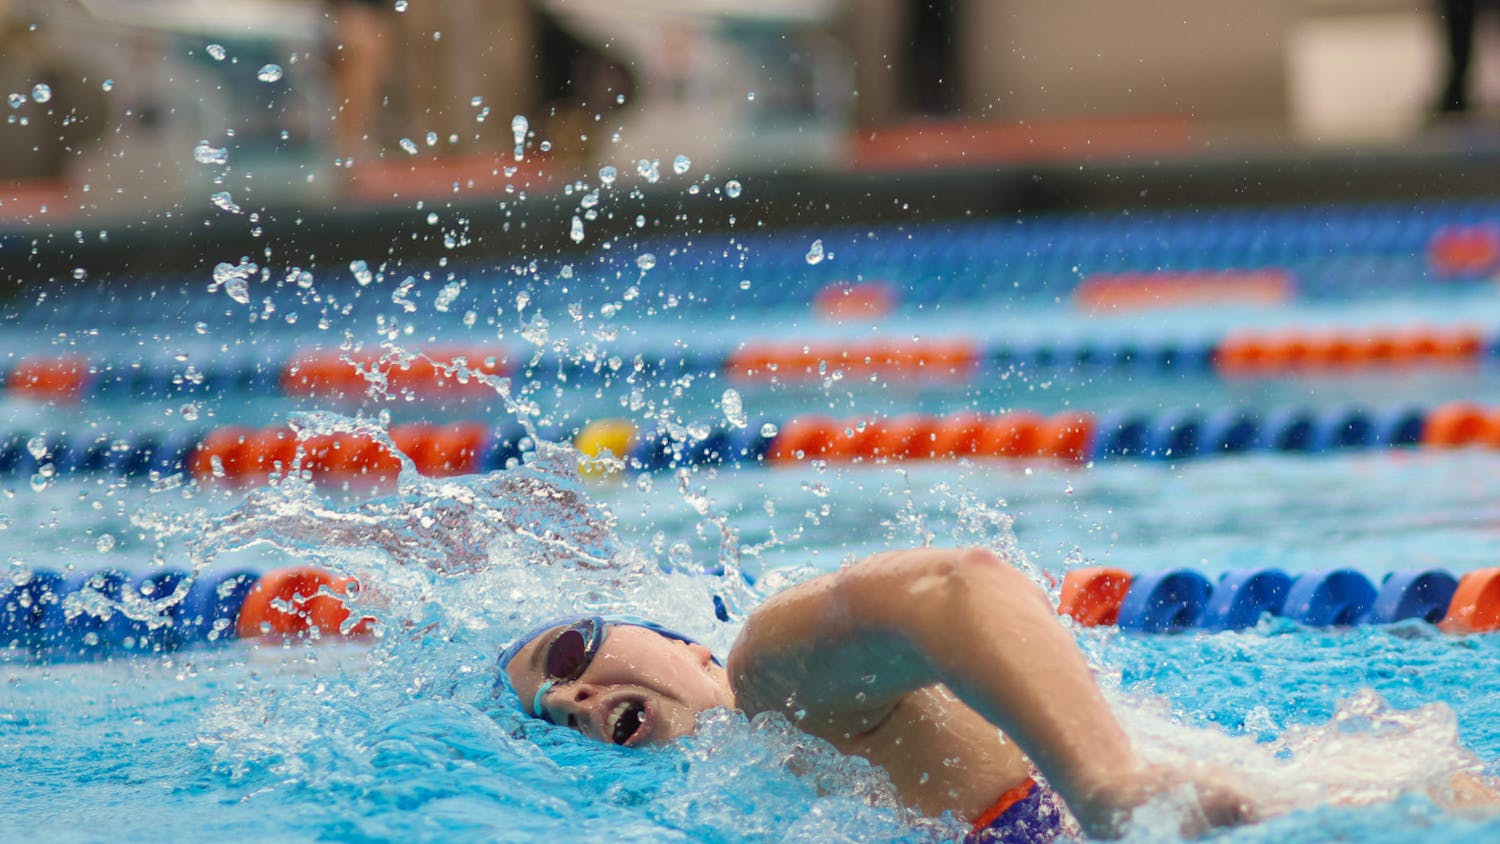 Florida swimmer Leah DeGeorge swims in the Gators' 207-83 win against the Florida Atlantic Owls Friday, Jan. 13, 2023.